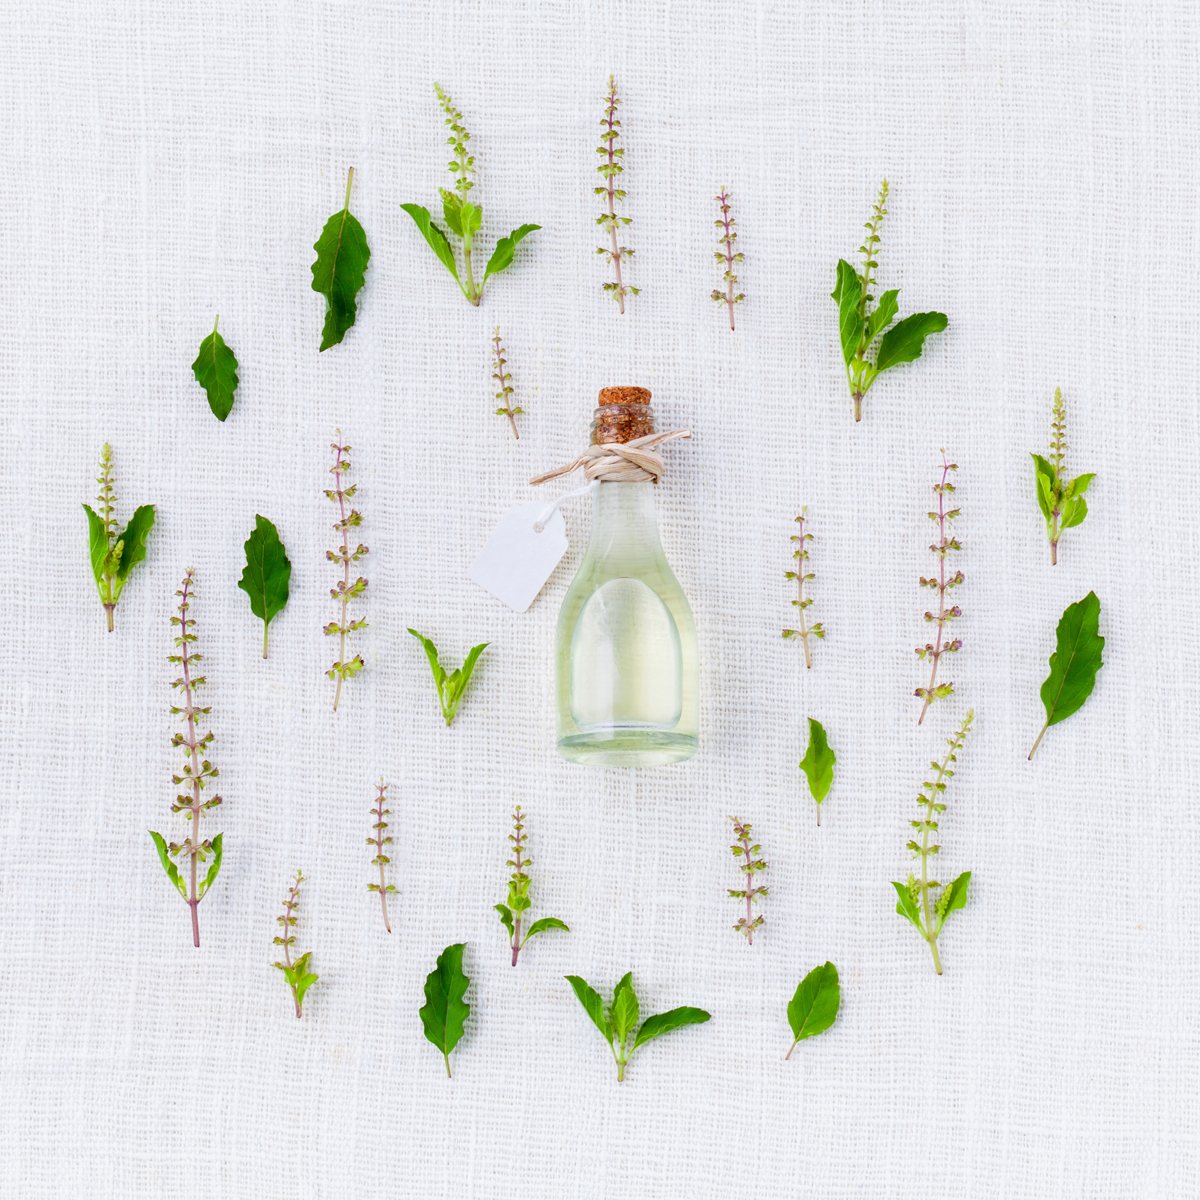 Aromatherapy – Make Your Own in Minutes for Pennies